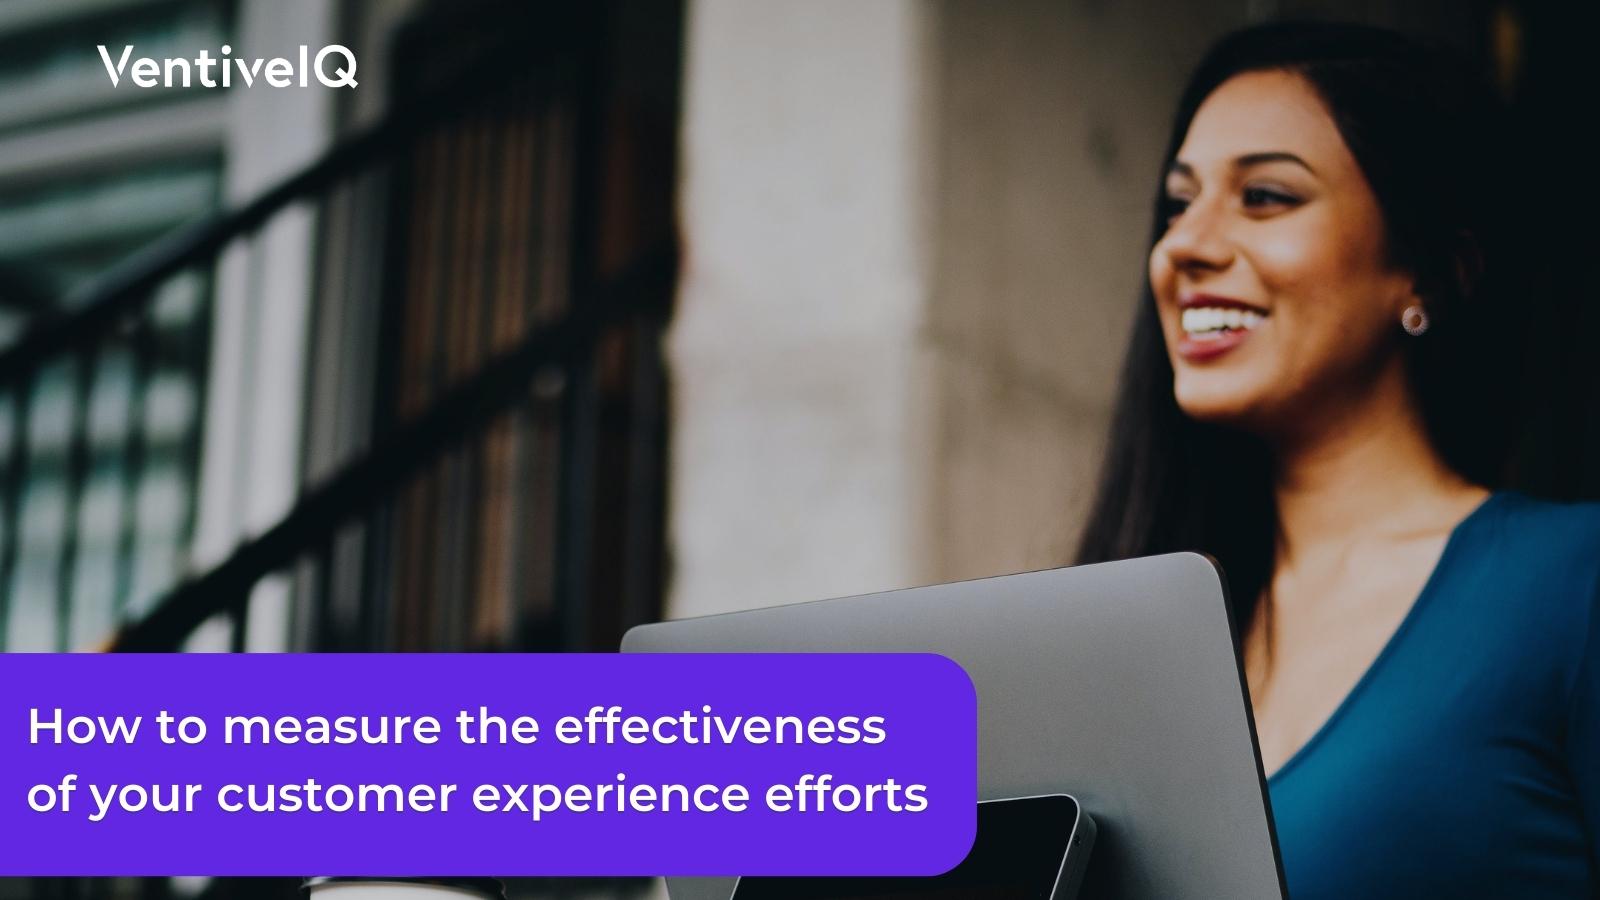 How to measure the effectiveness of your customer experience efforts